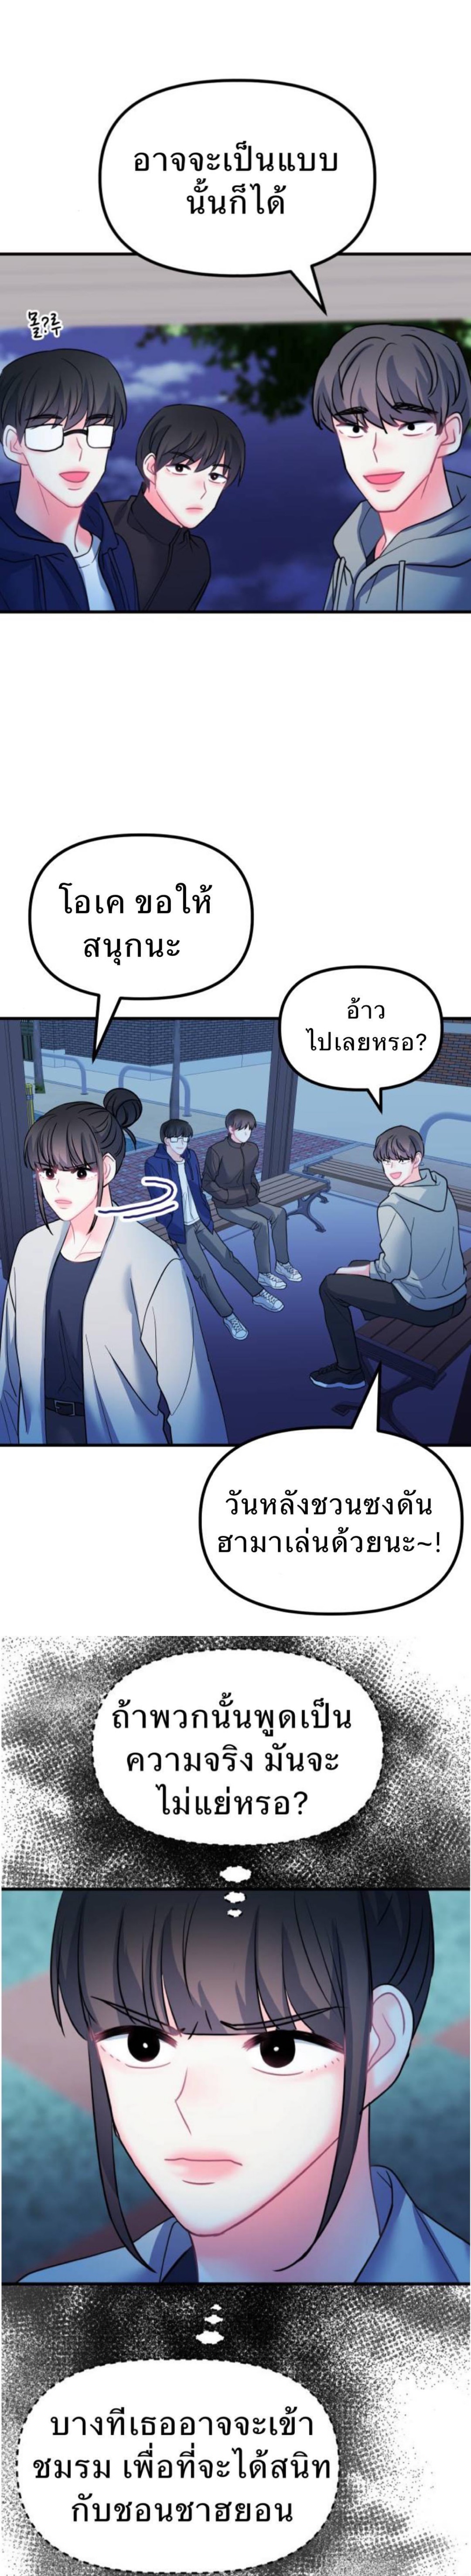 Mary’s Burning Circuit of Happiness ตอนที่ 20